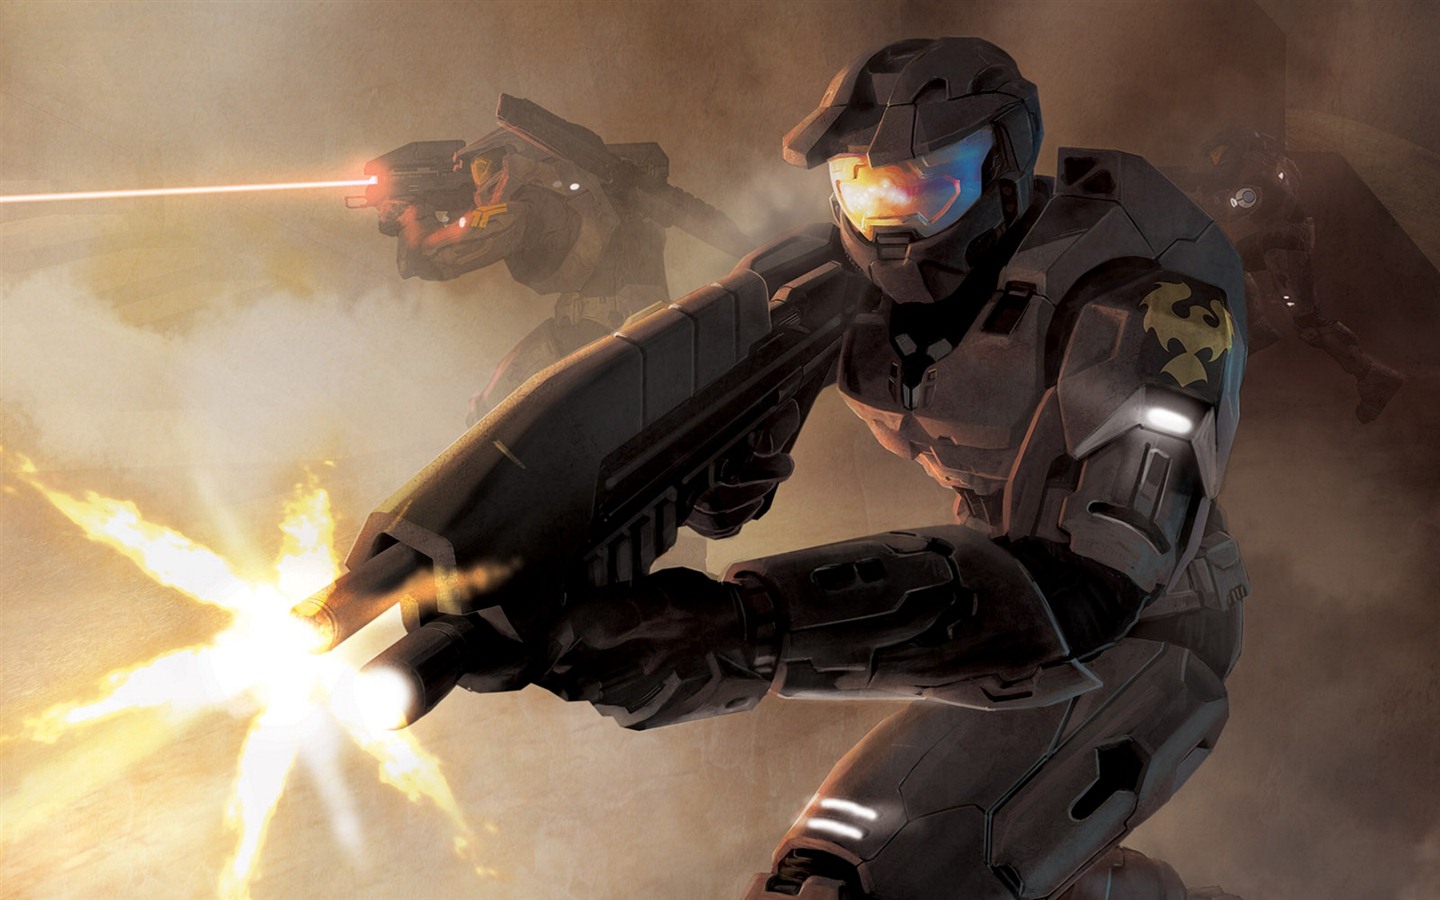 Halo game HD wallpapers #10 - 1440x900